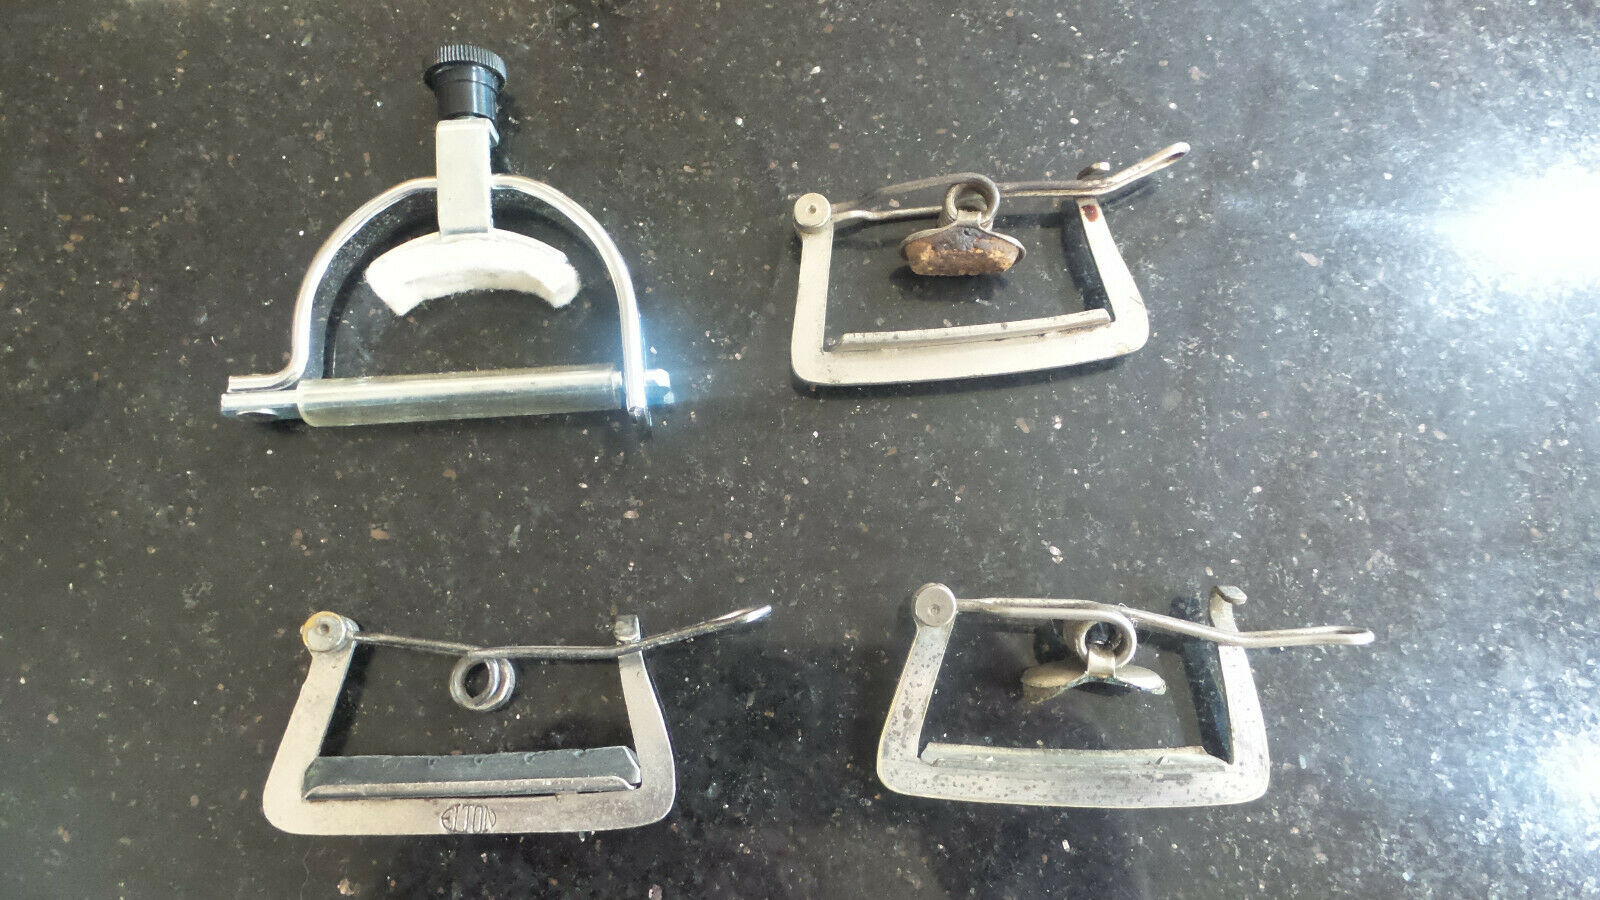 Group Collection Of 4 Vintage Guitar Capo's, 3 Very Early Models.